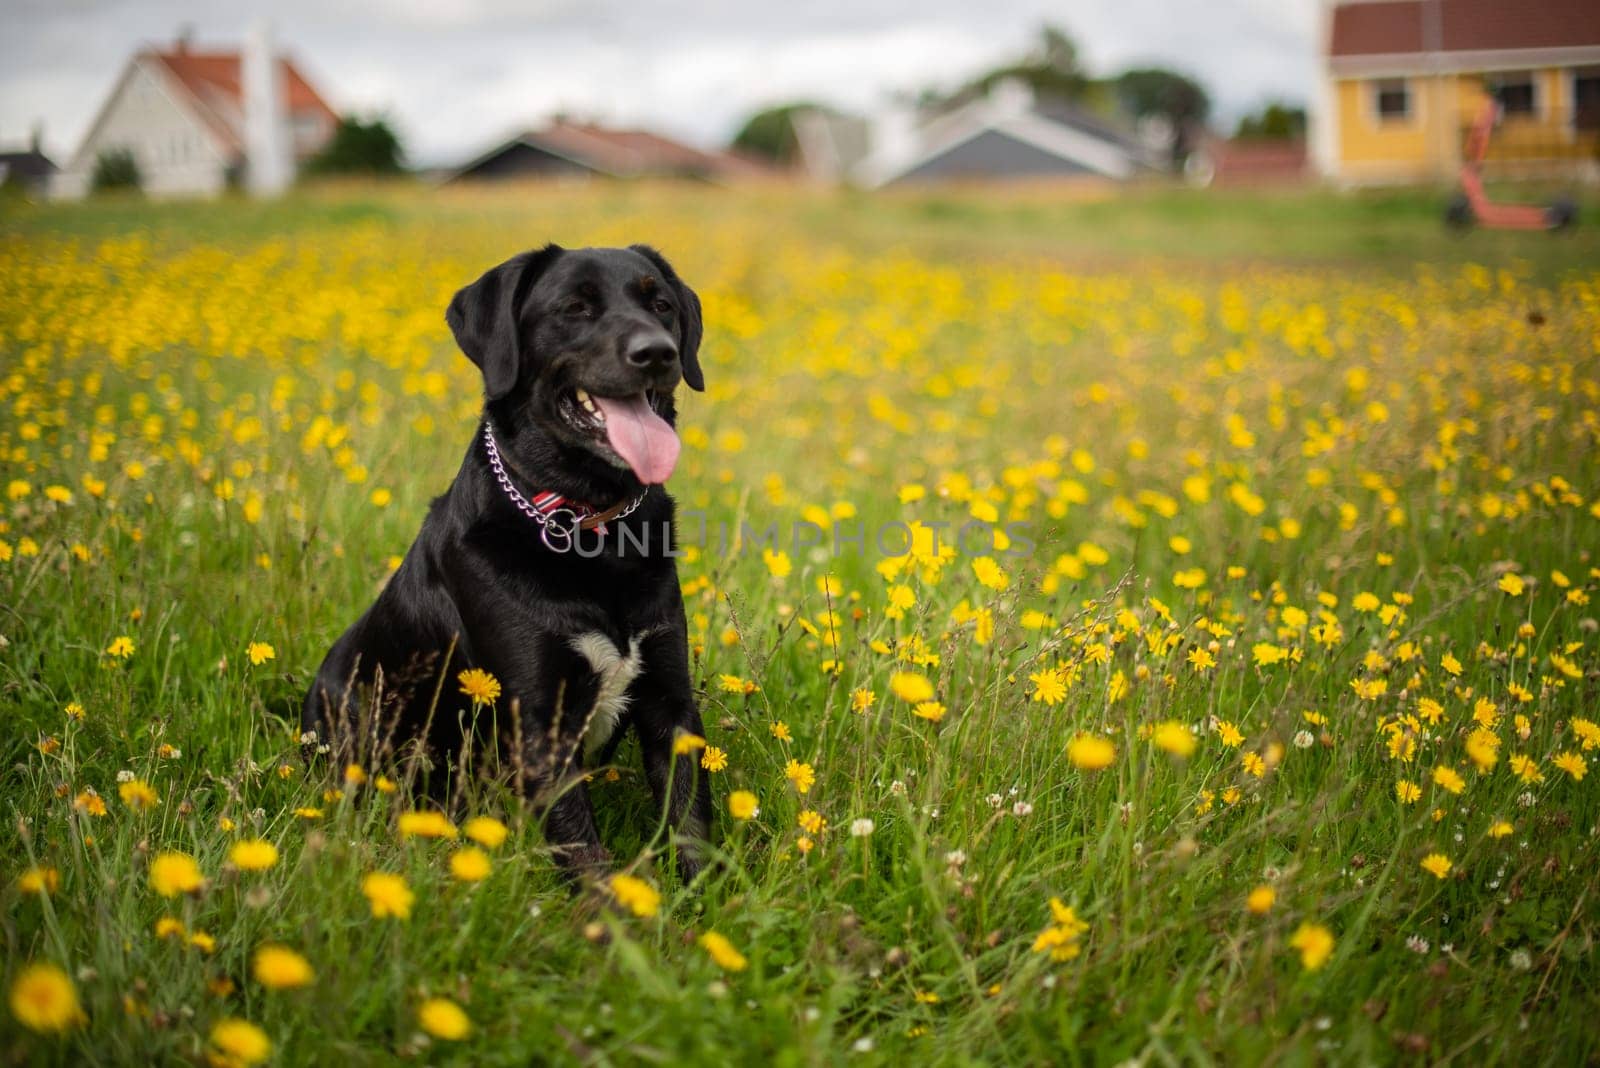 A joyful black Labrador retriever sitting in a lush field dotted with vibrant yellow wildflowers, with blurred houses in the background.